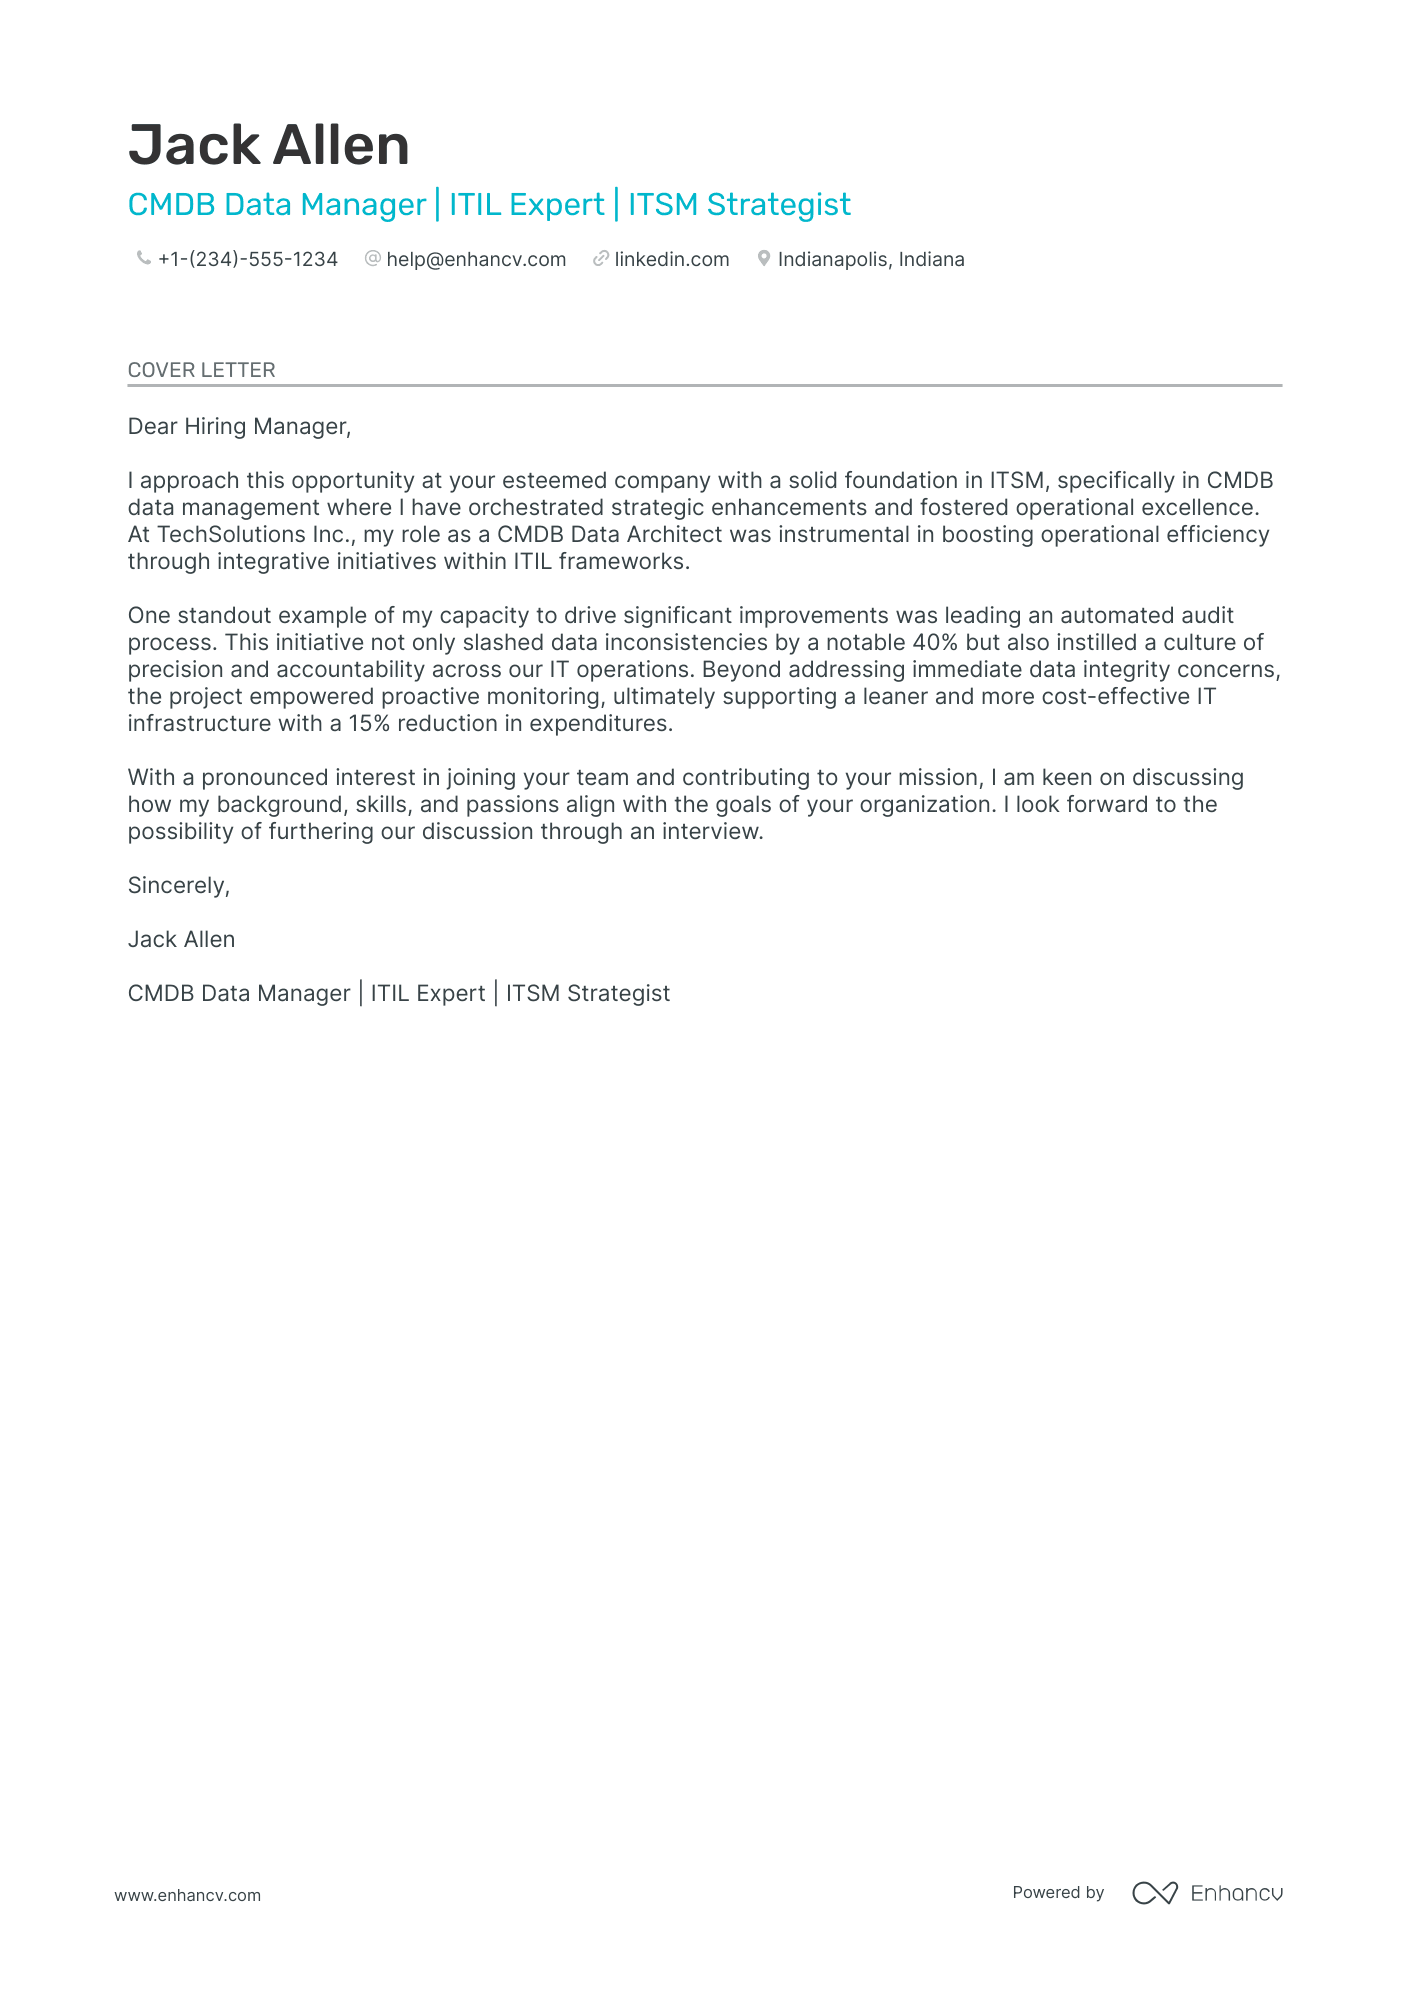 no experience business analyst cover letter